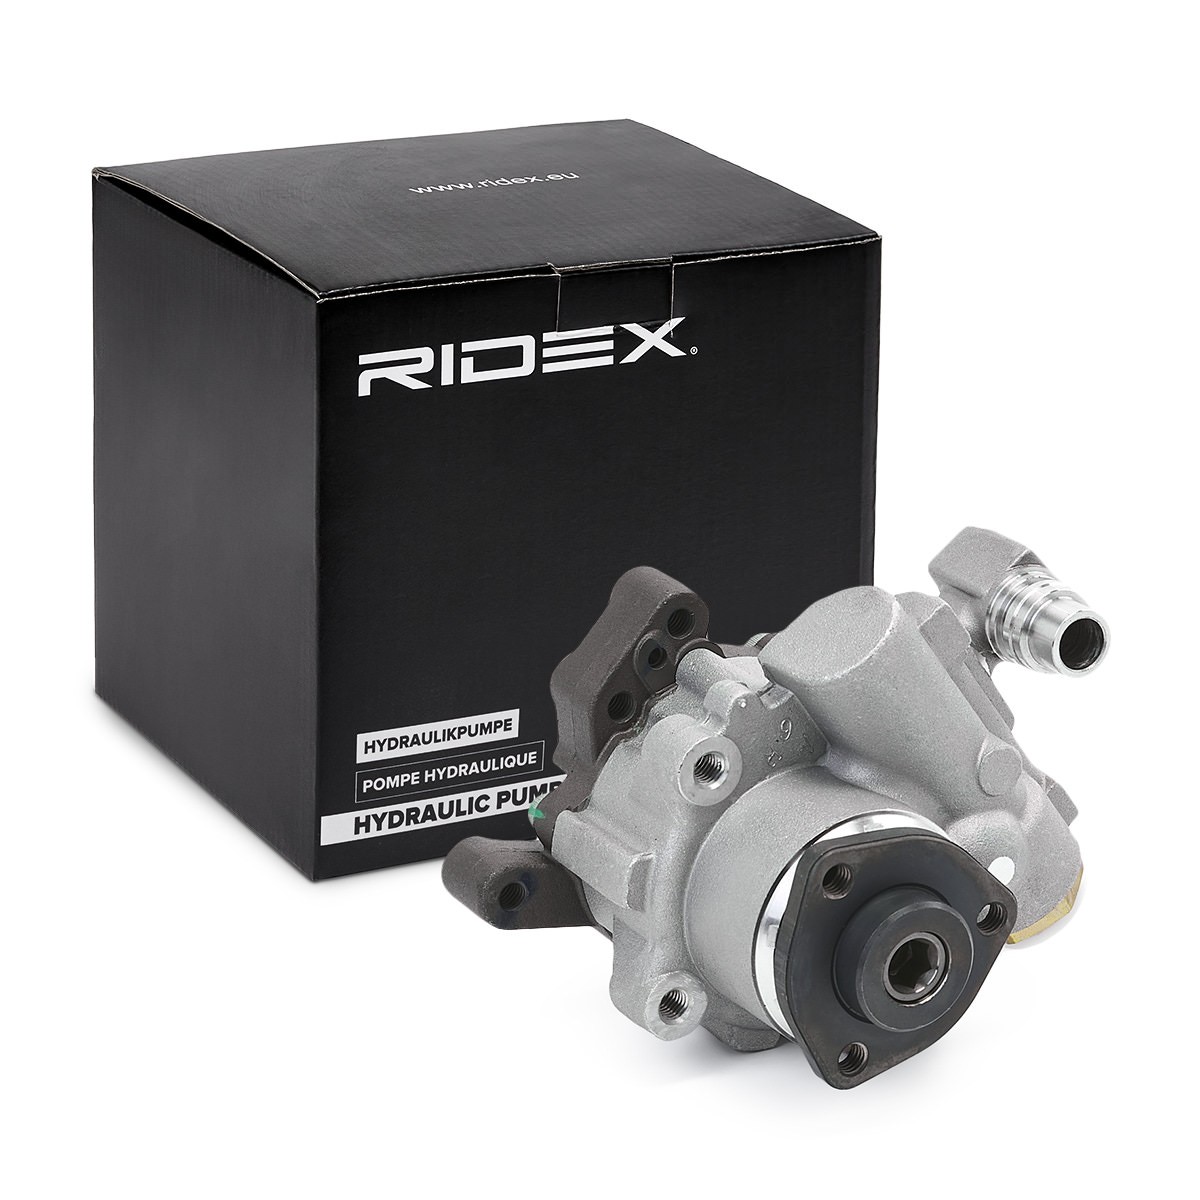 RIDEX Hydraulic steering pump 12H0894 suitable for MERCEDES-BENZ ML-Class, S-Class